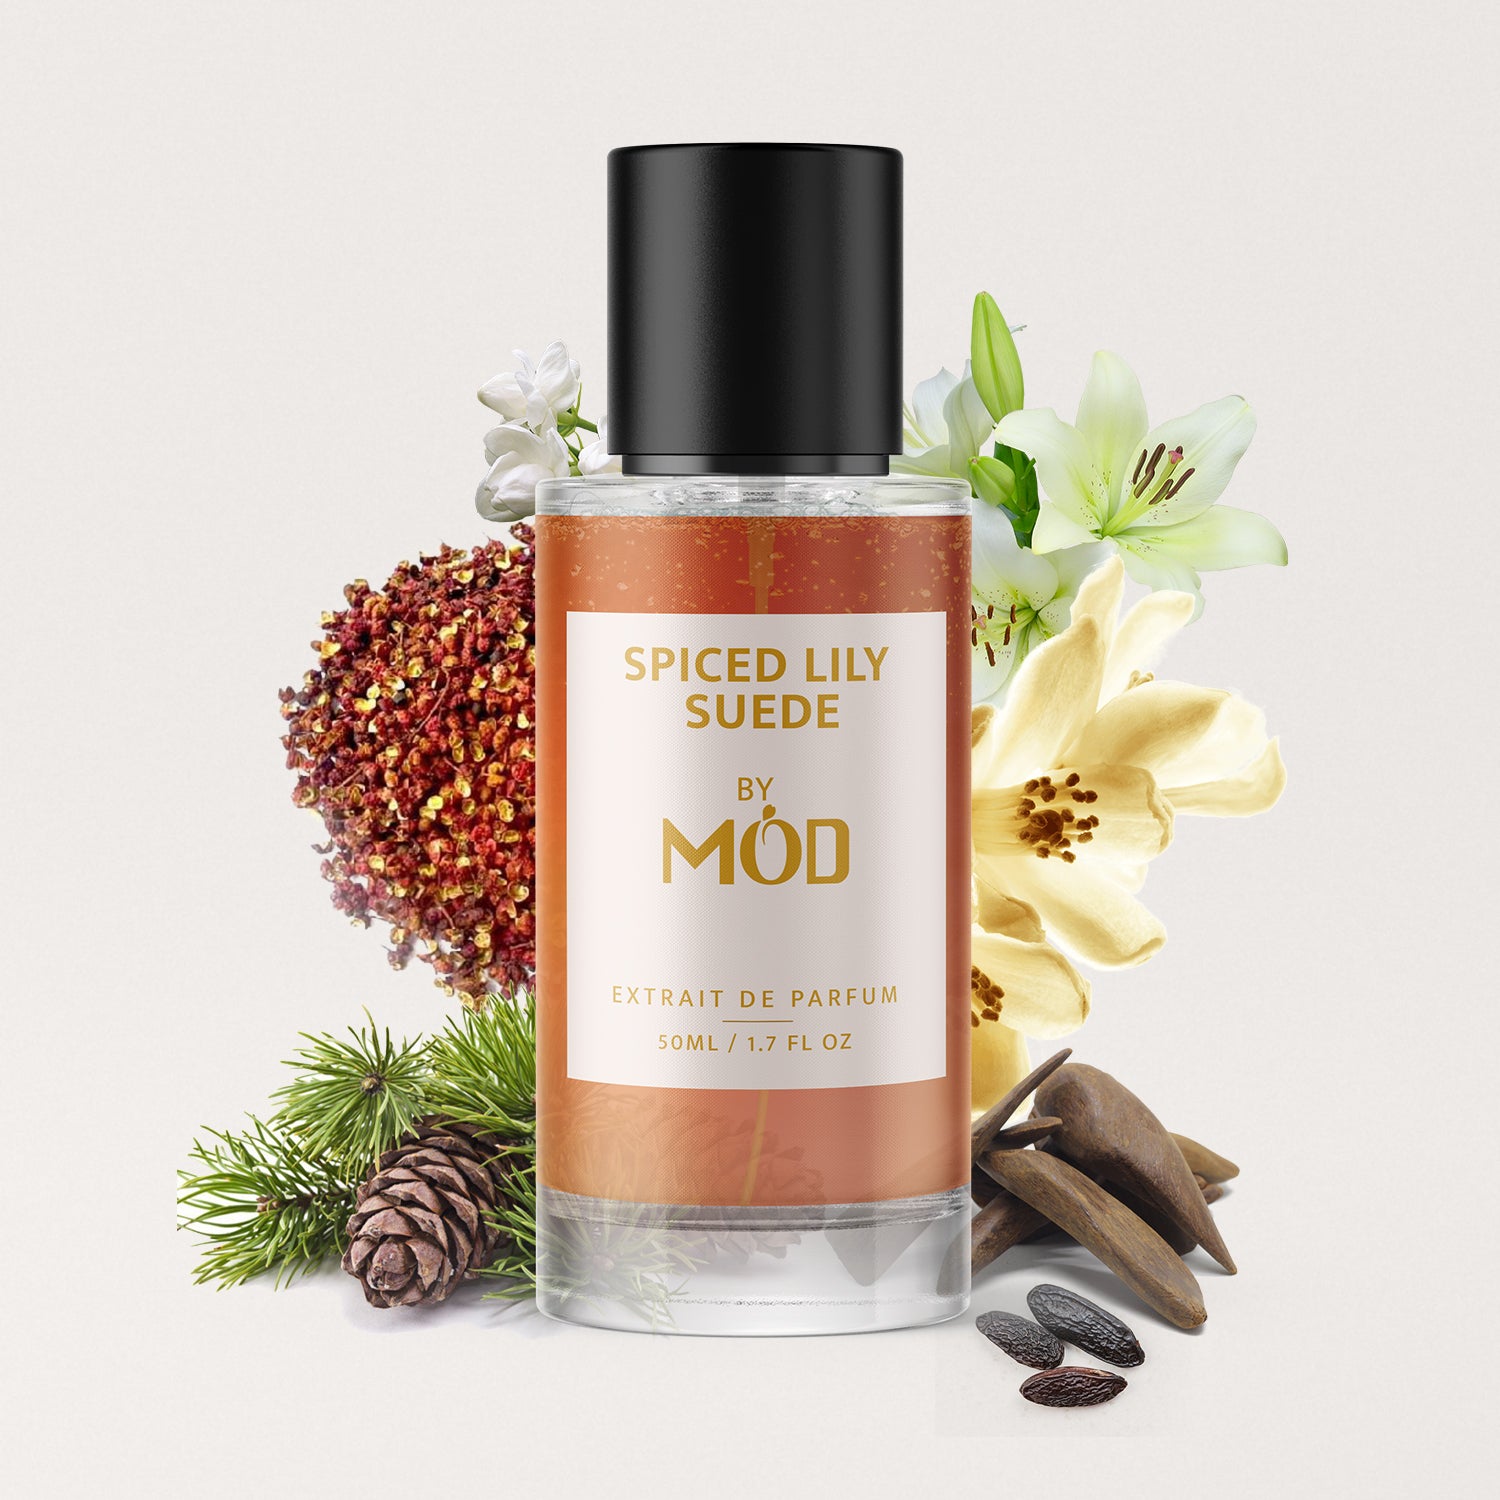 Spiced Lily Suede - Mod Fragrances